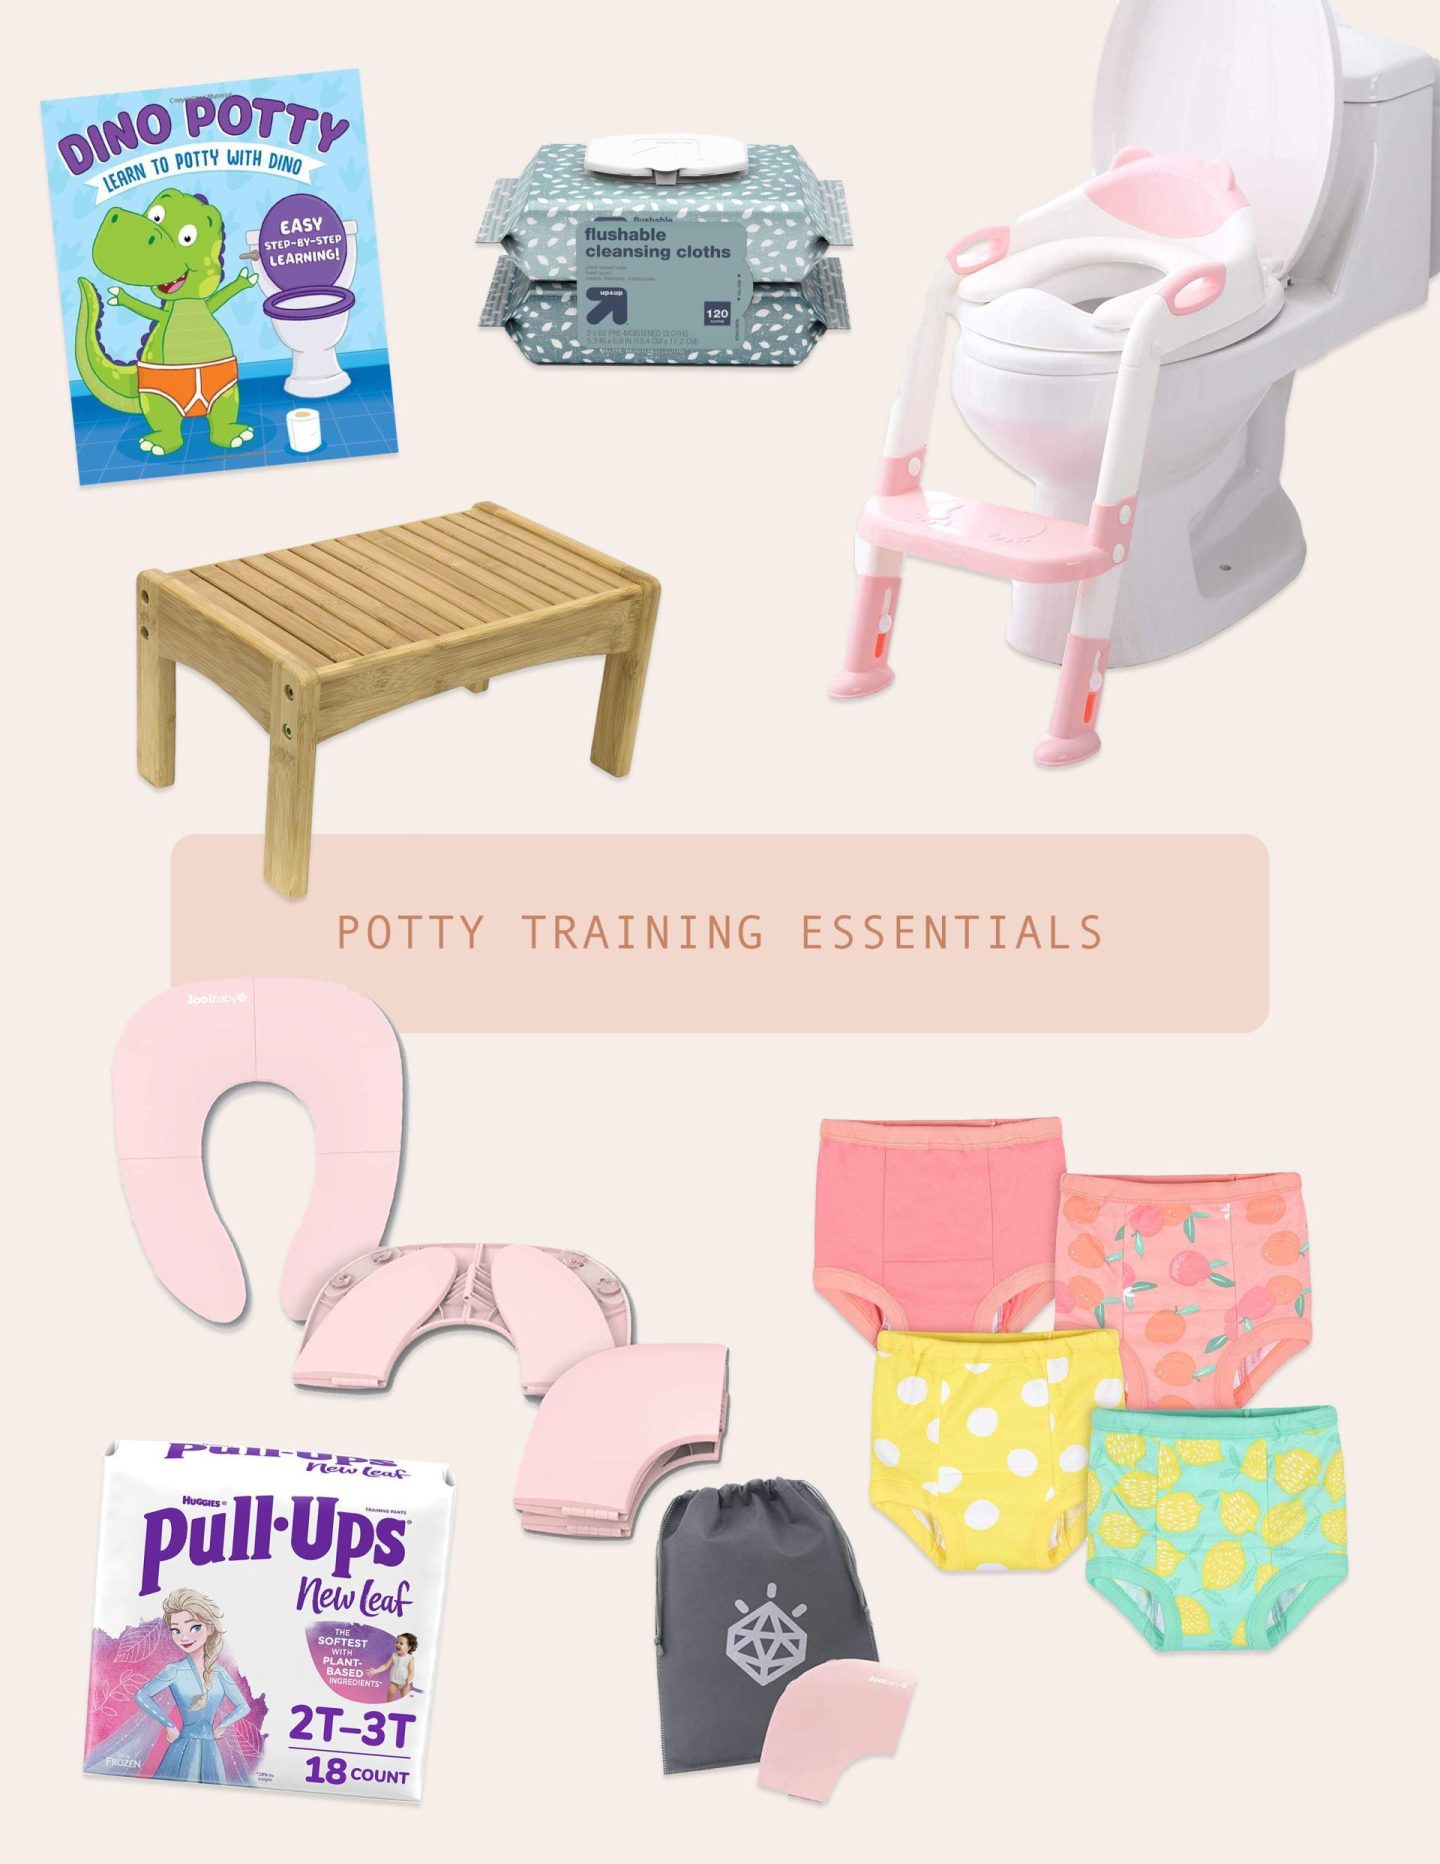 Potty training techniques and methods